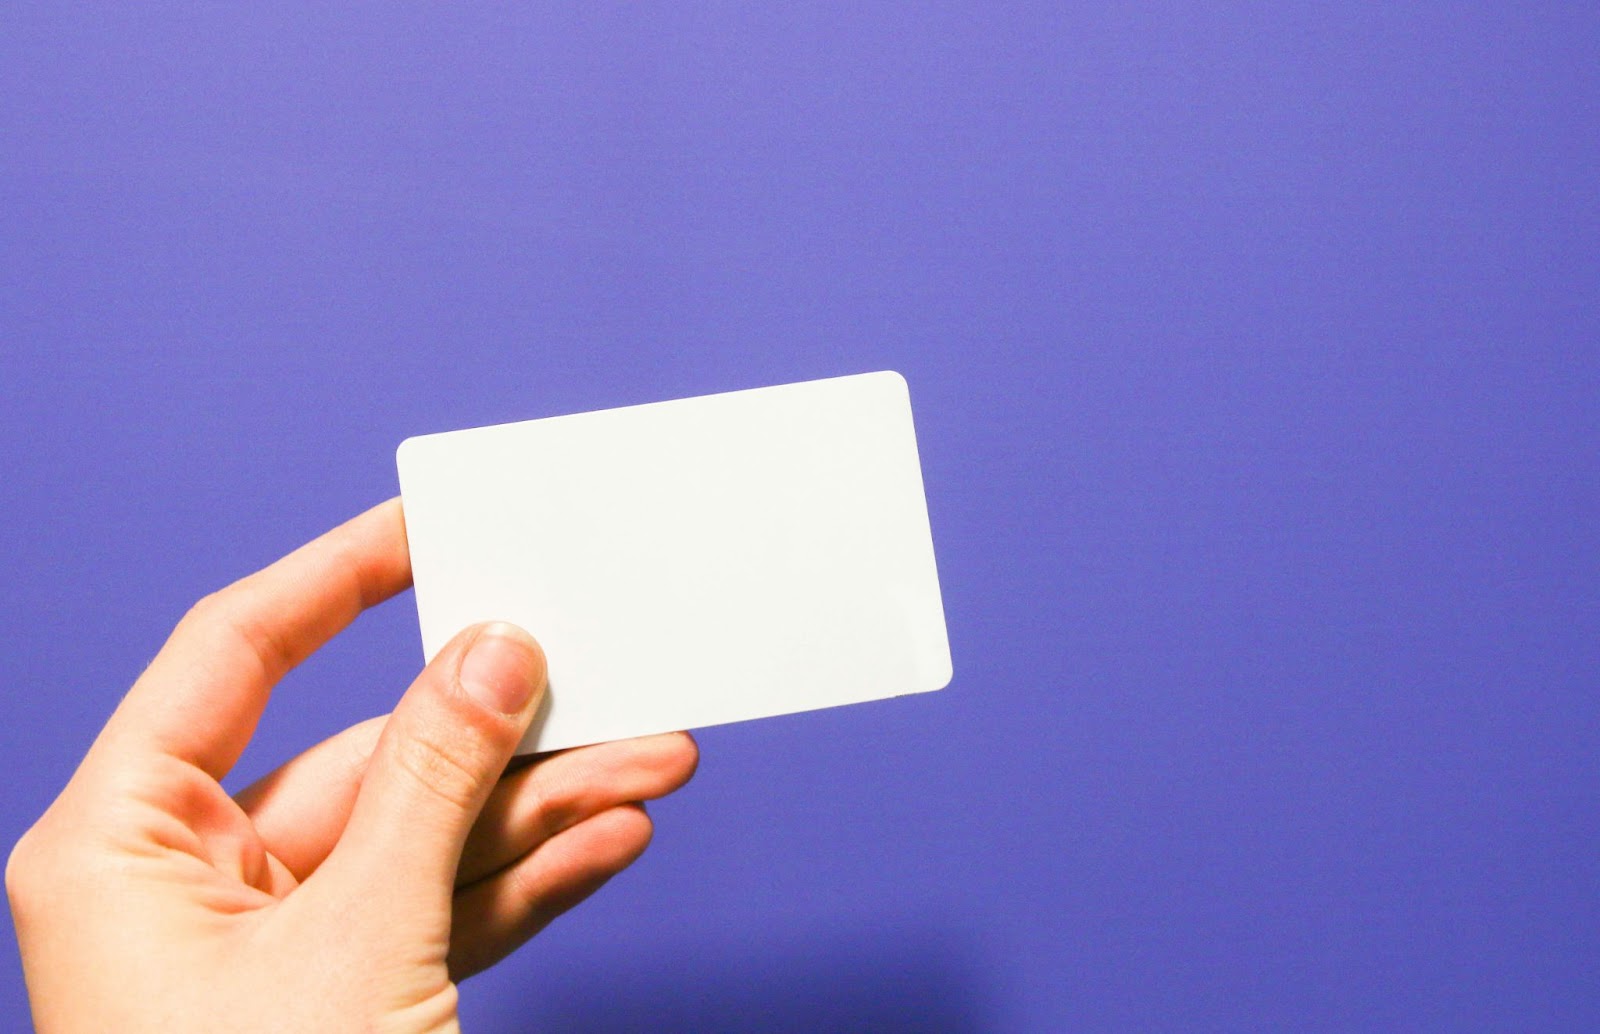 a hand holding a white card on a blue background